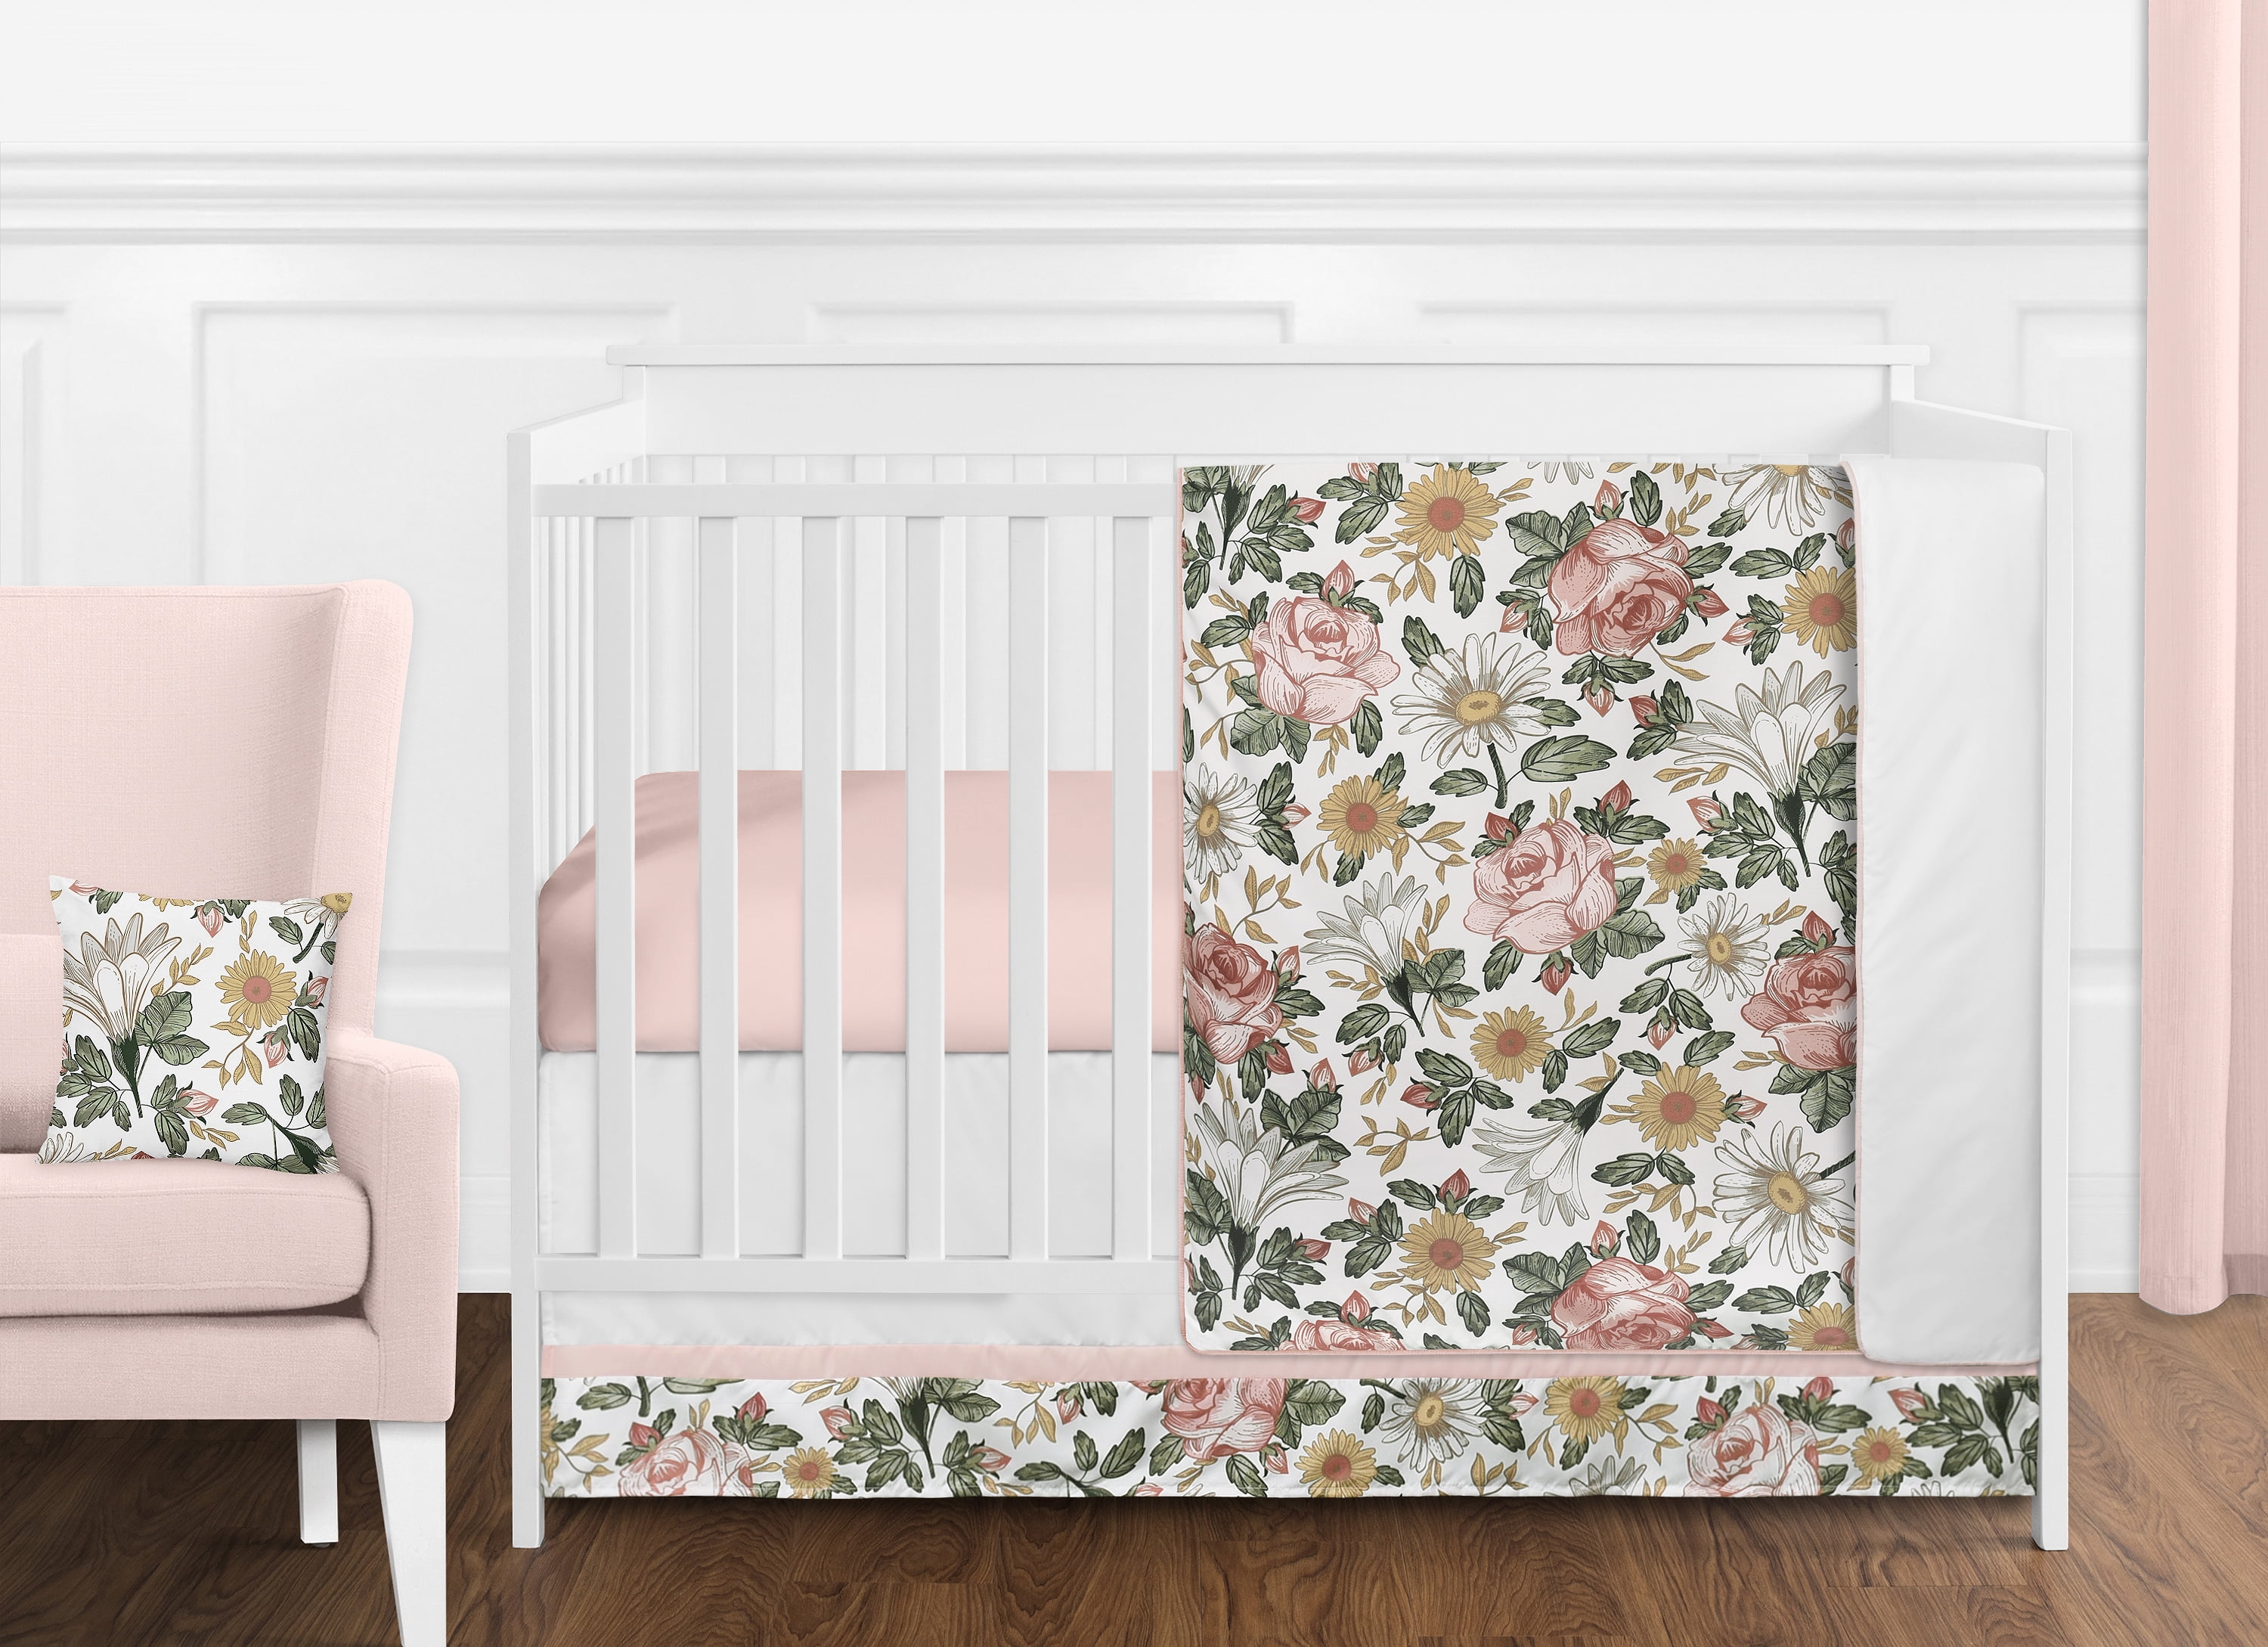 Set of 4 and Kids Blush Pink Sweet Jojo Designs Vintage Floral Boho Wall Art Prints Room Decor for Baby Nursery Green and White Shabby Chic Rose Flower Farmhouse Wildflower Yellow